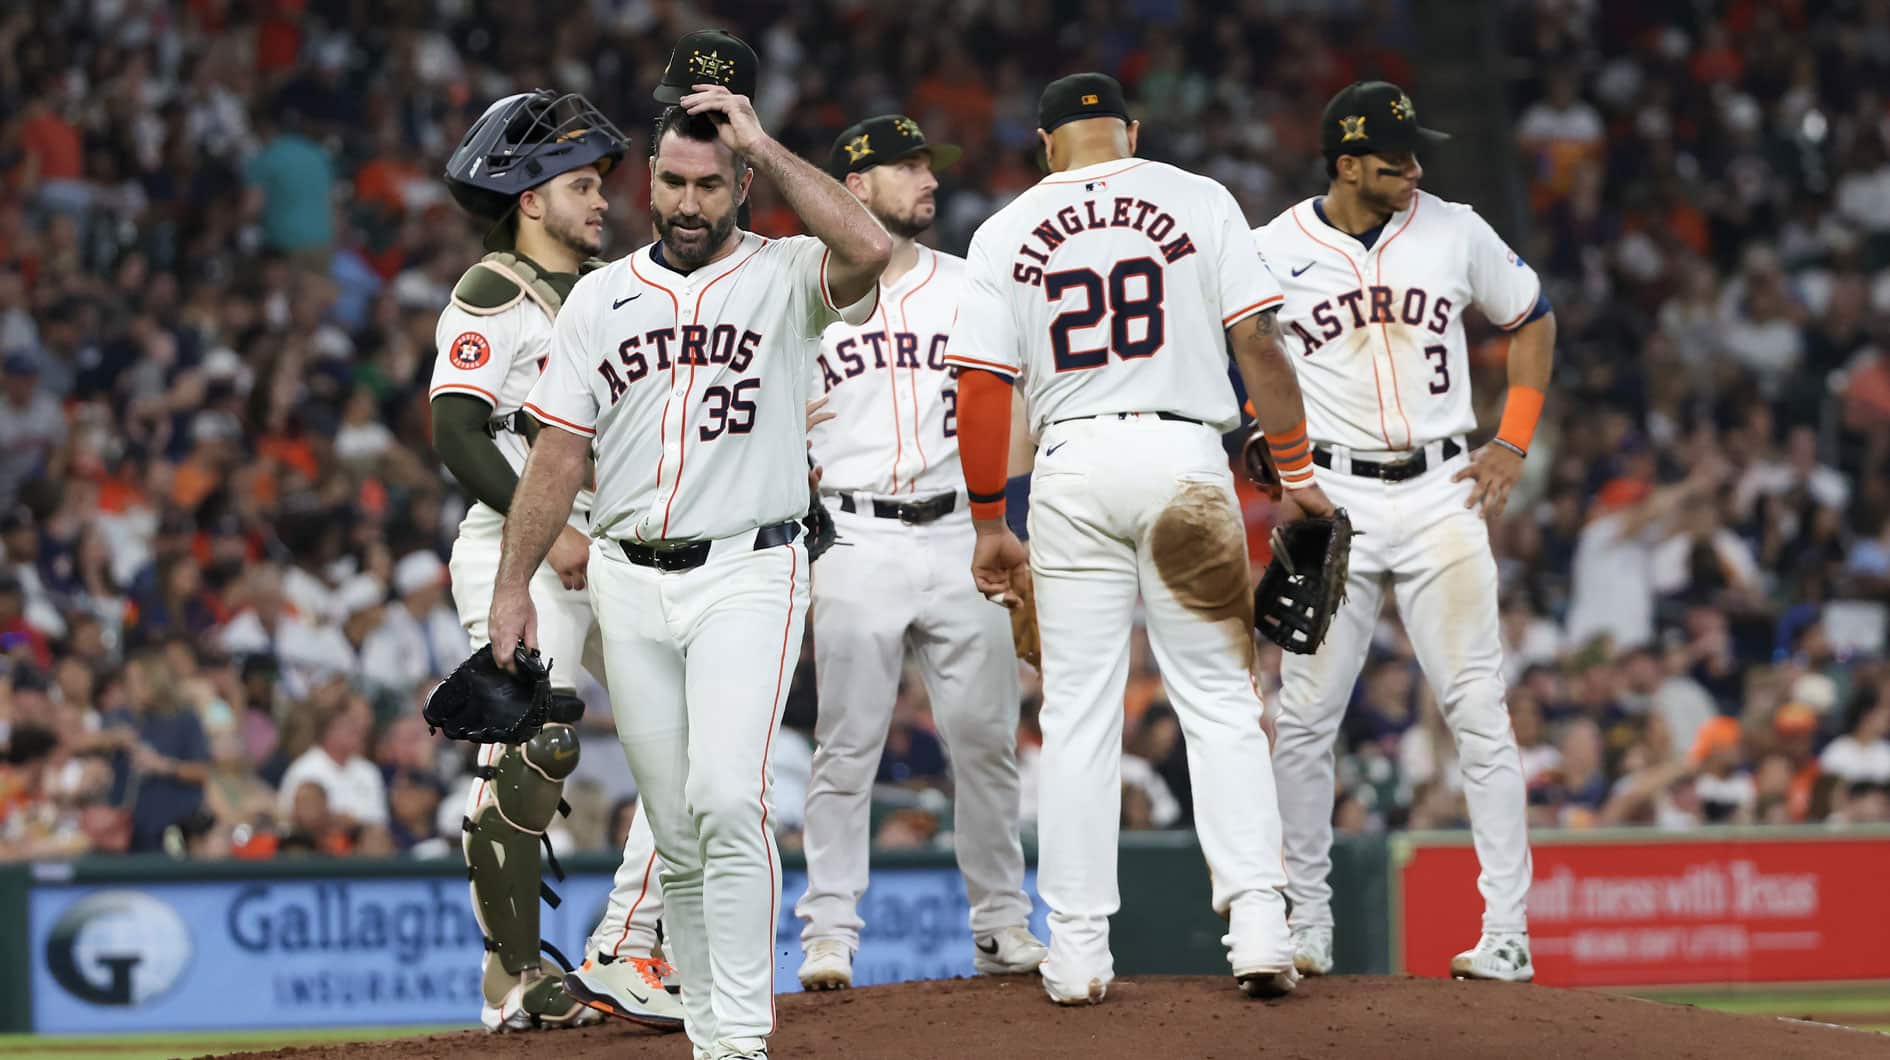 Houston Astros starting pitcher Justin Verlander (35) is taken out of the game against the Milwaukee Brewers in the fifth inning at Minute Maid Park